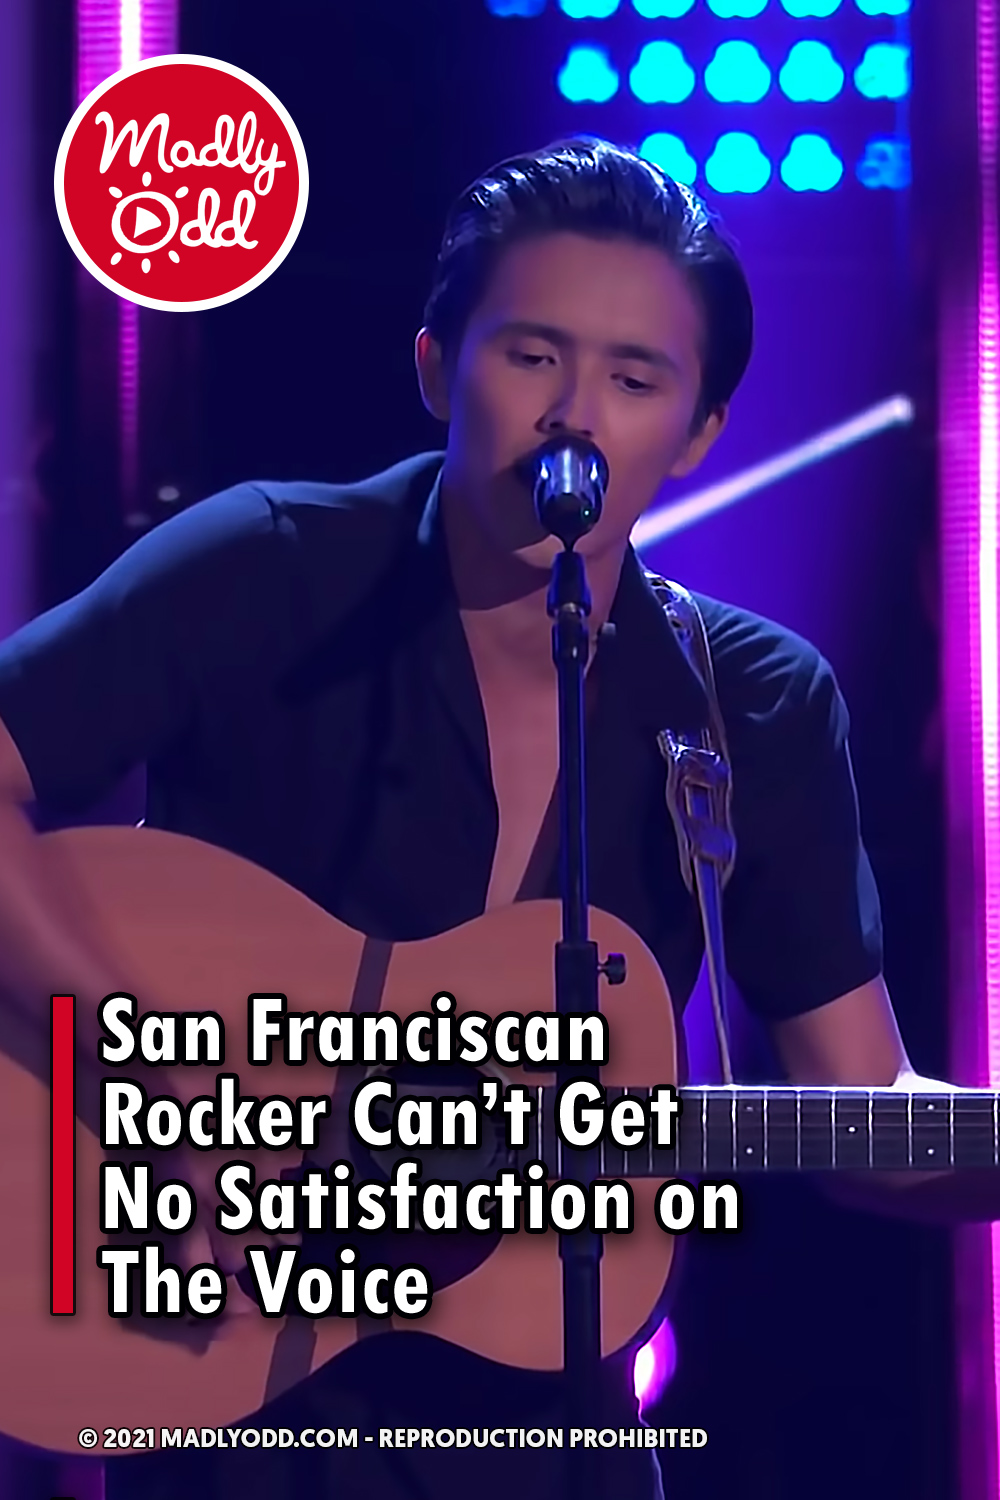 San Franciscan Rocker Can’t Get No Satisfaction on The Voice